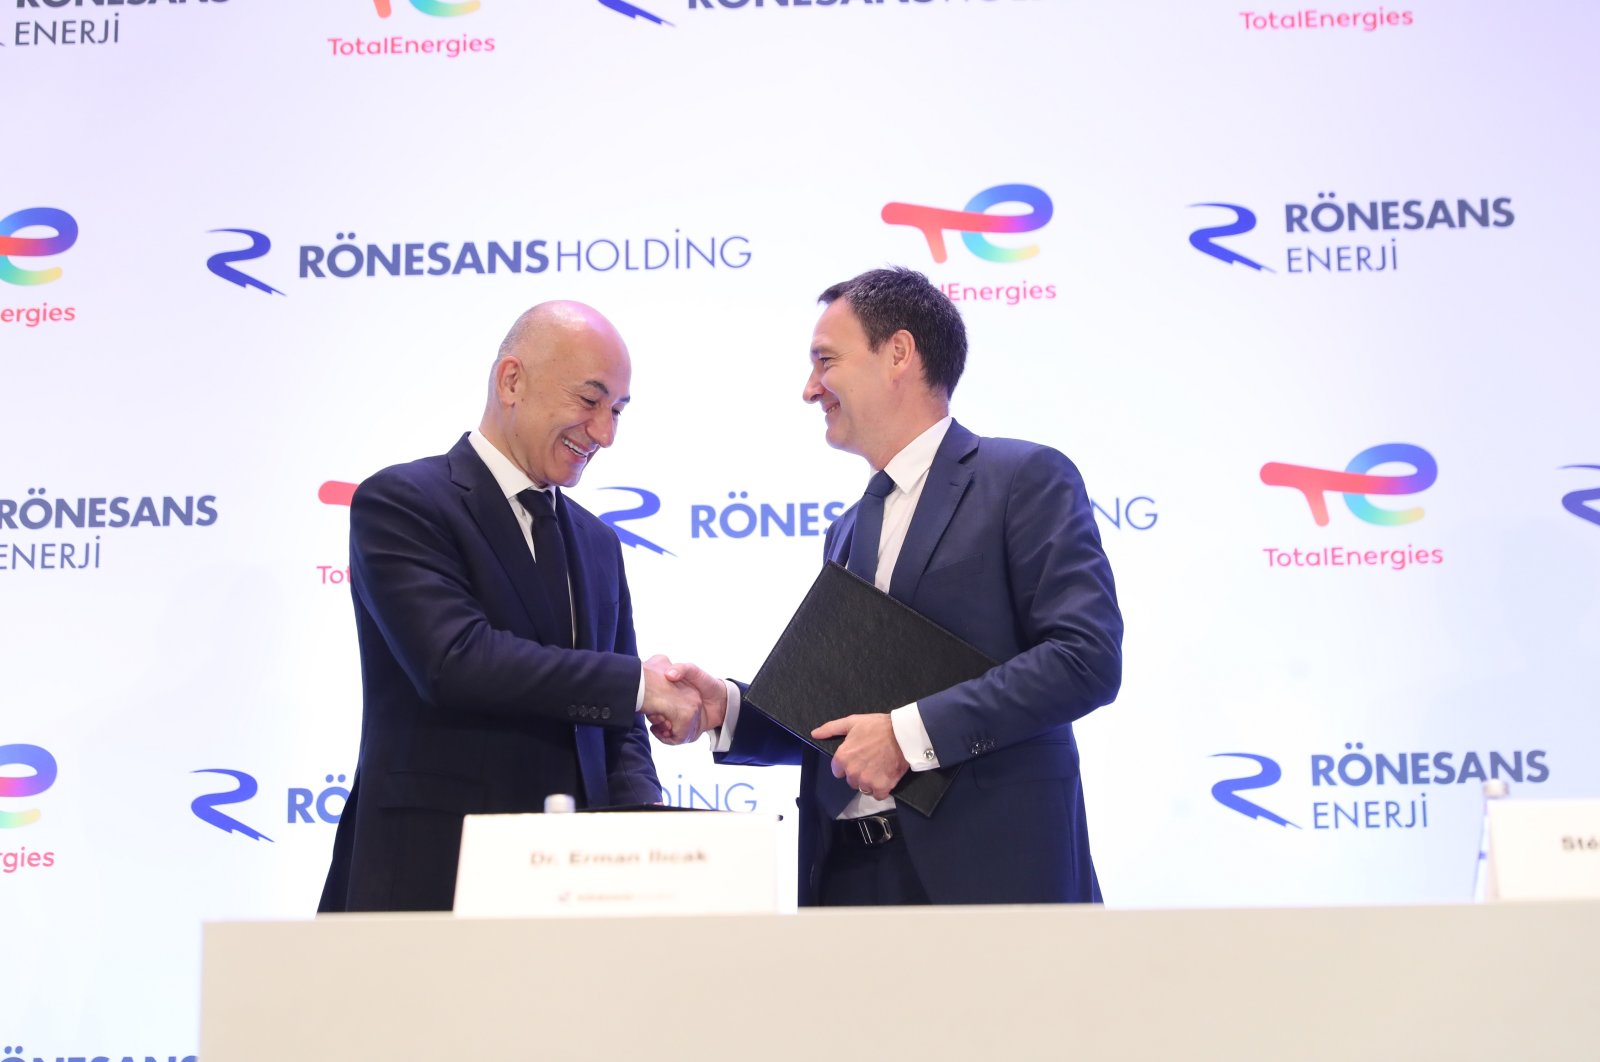 Rönesans Holding Chair Erman Ilıcak (L) and Stephane Michel, president of Natural Gas, Energy and Renewable Energy at TotalEnergies, shake hands after signing a partnership agreement, in Istanbul, Türkiye, July 21, 2023. (Courtesy of Rönesans Holding)